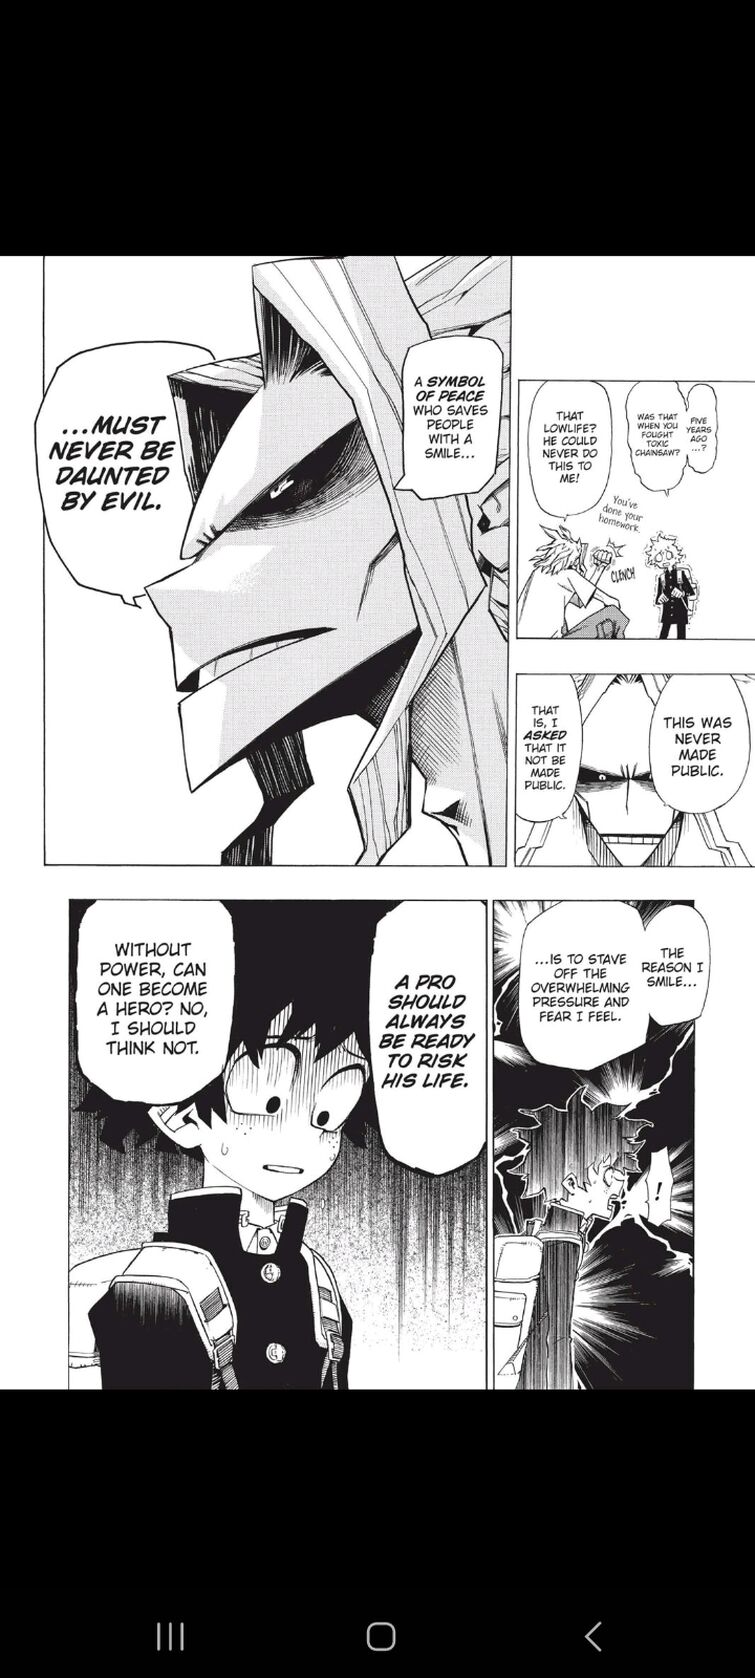 My Hero Academia Chapter 408 Spoiler-Predictions and Release Date